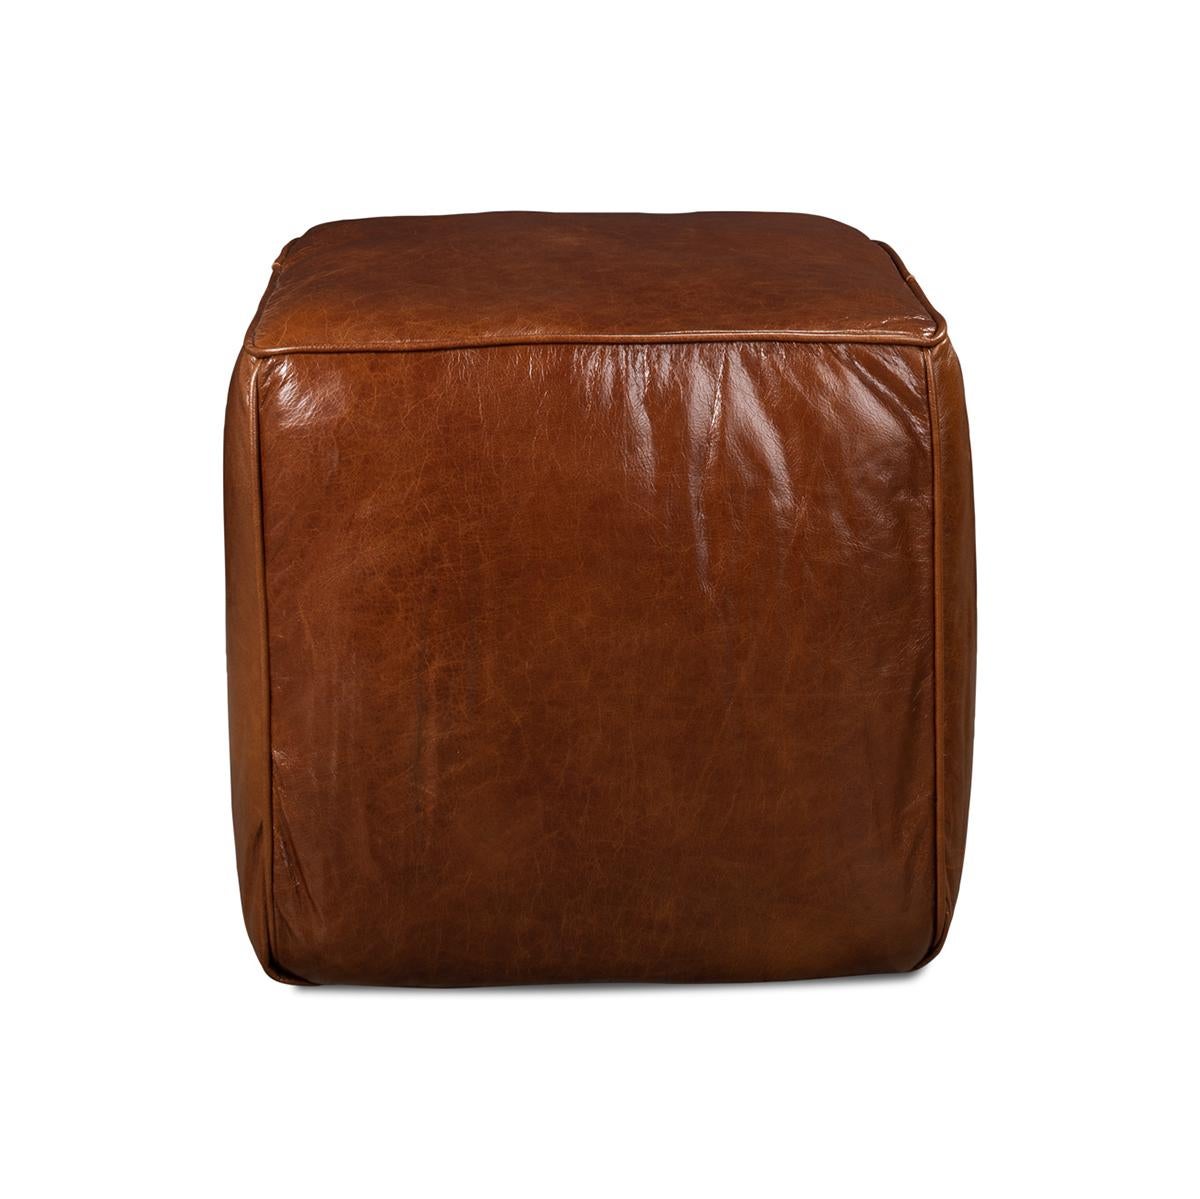  Ideal for modern, traditional, or even Western aesthetics, this cube is your go-to seating solution. The vintage brown leather adds character, making it a versatile piece that complements any decor. Transform your space with this adaptable and